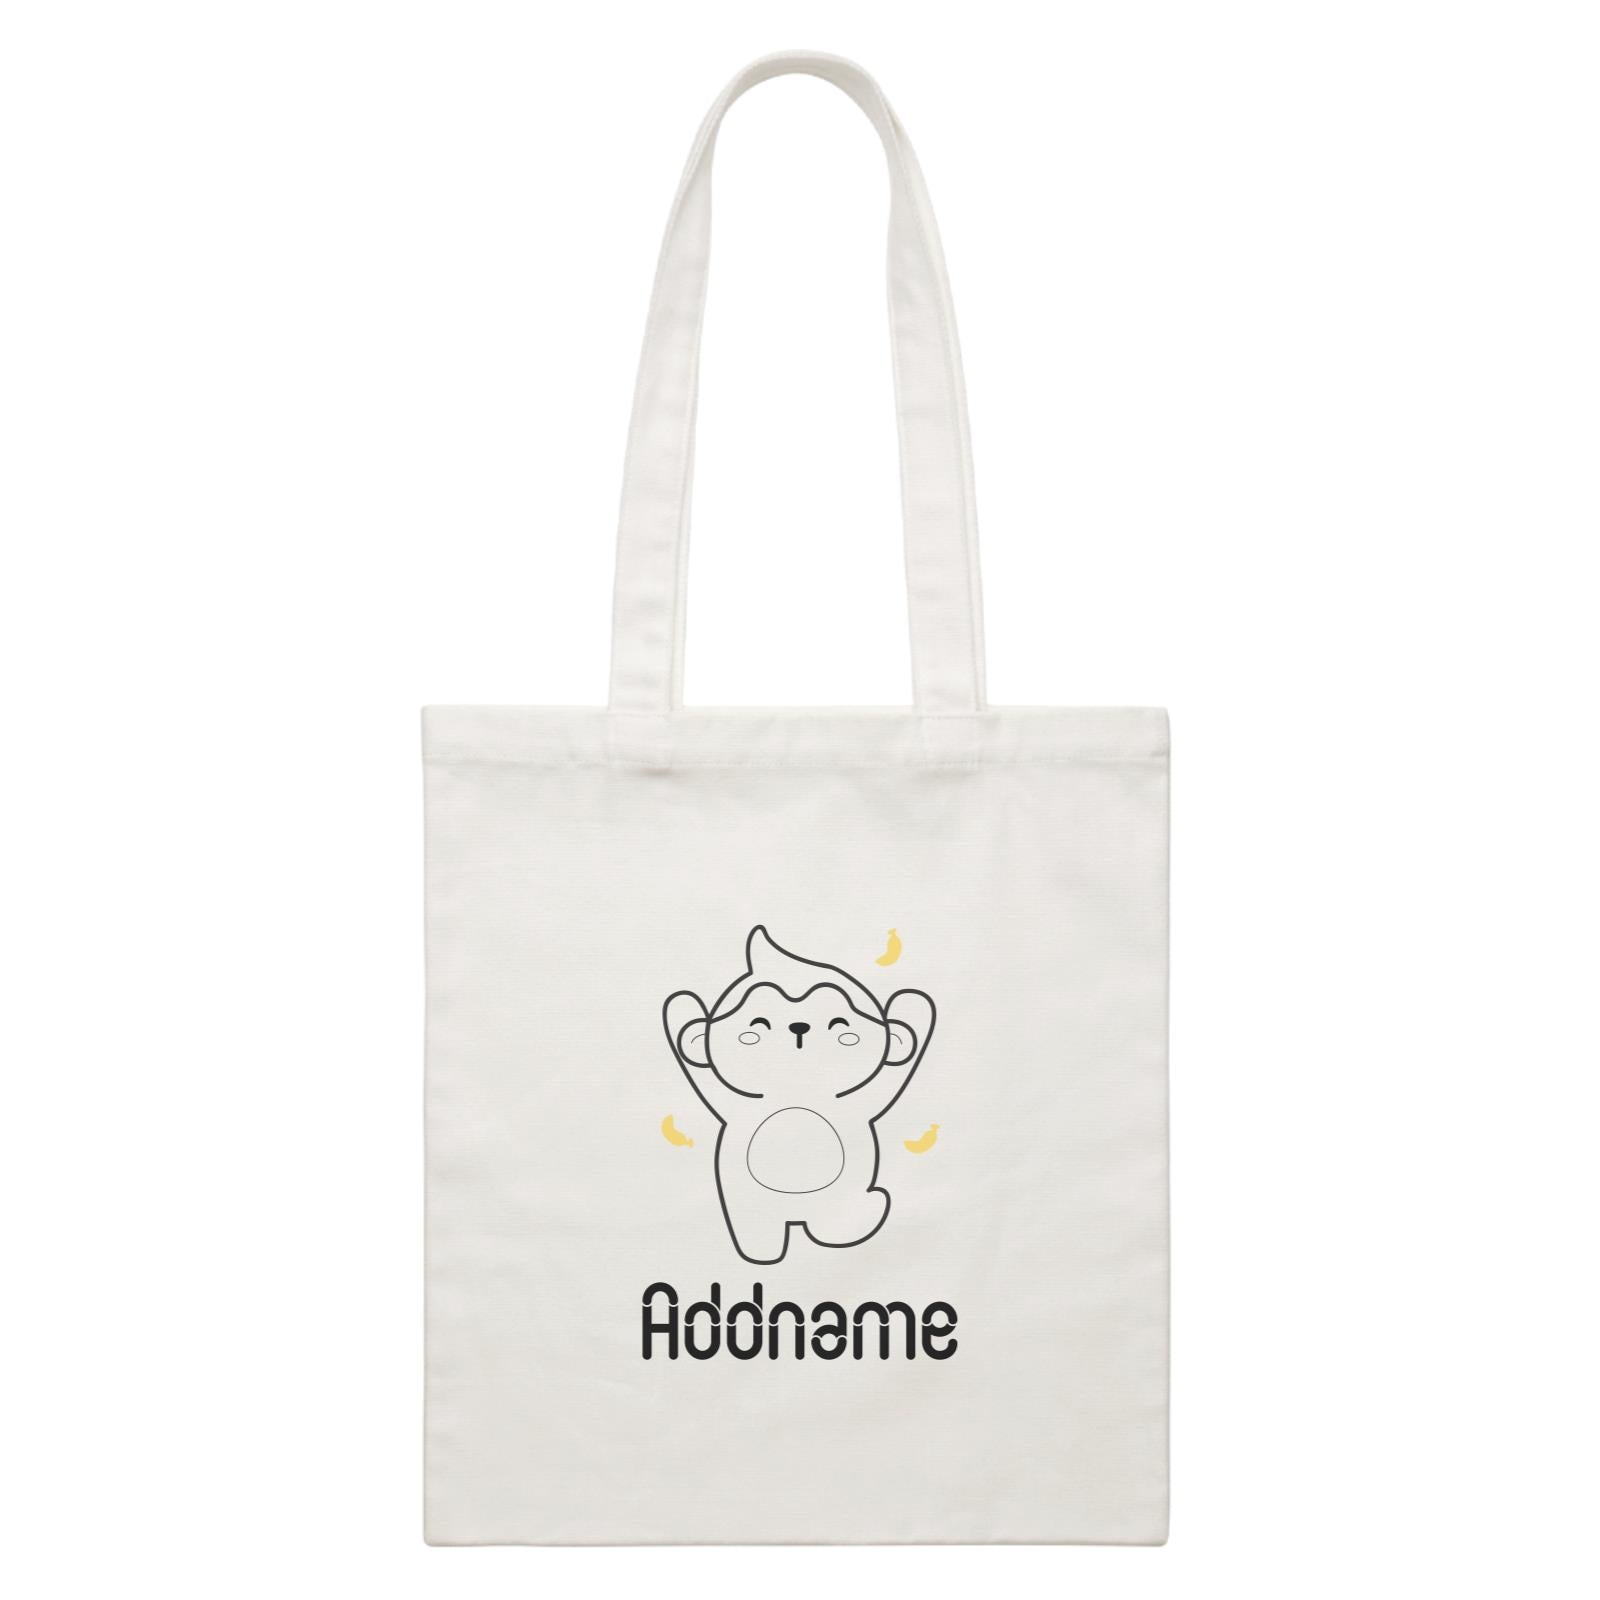 Coloring Outline Cute Hand Drawn Animals Furry Cheerful Monkey Addname White White Canvas Bag